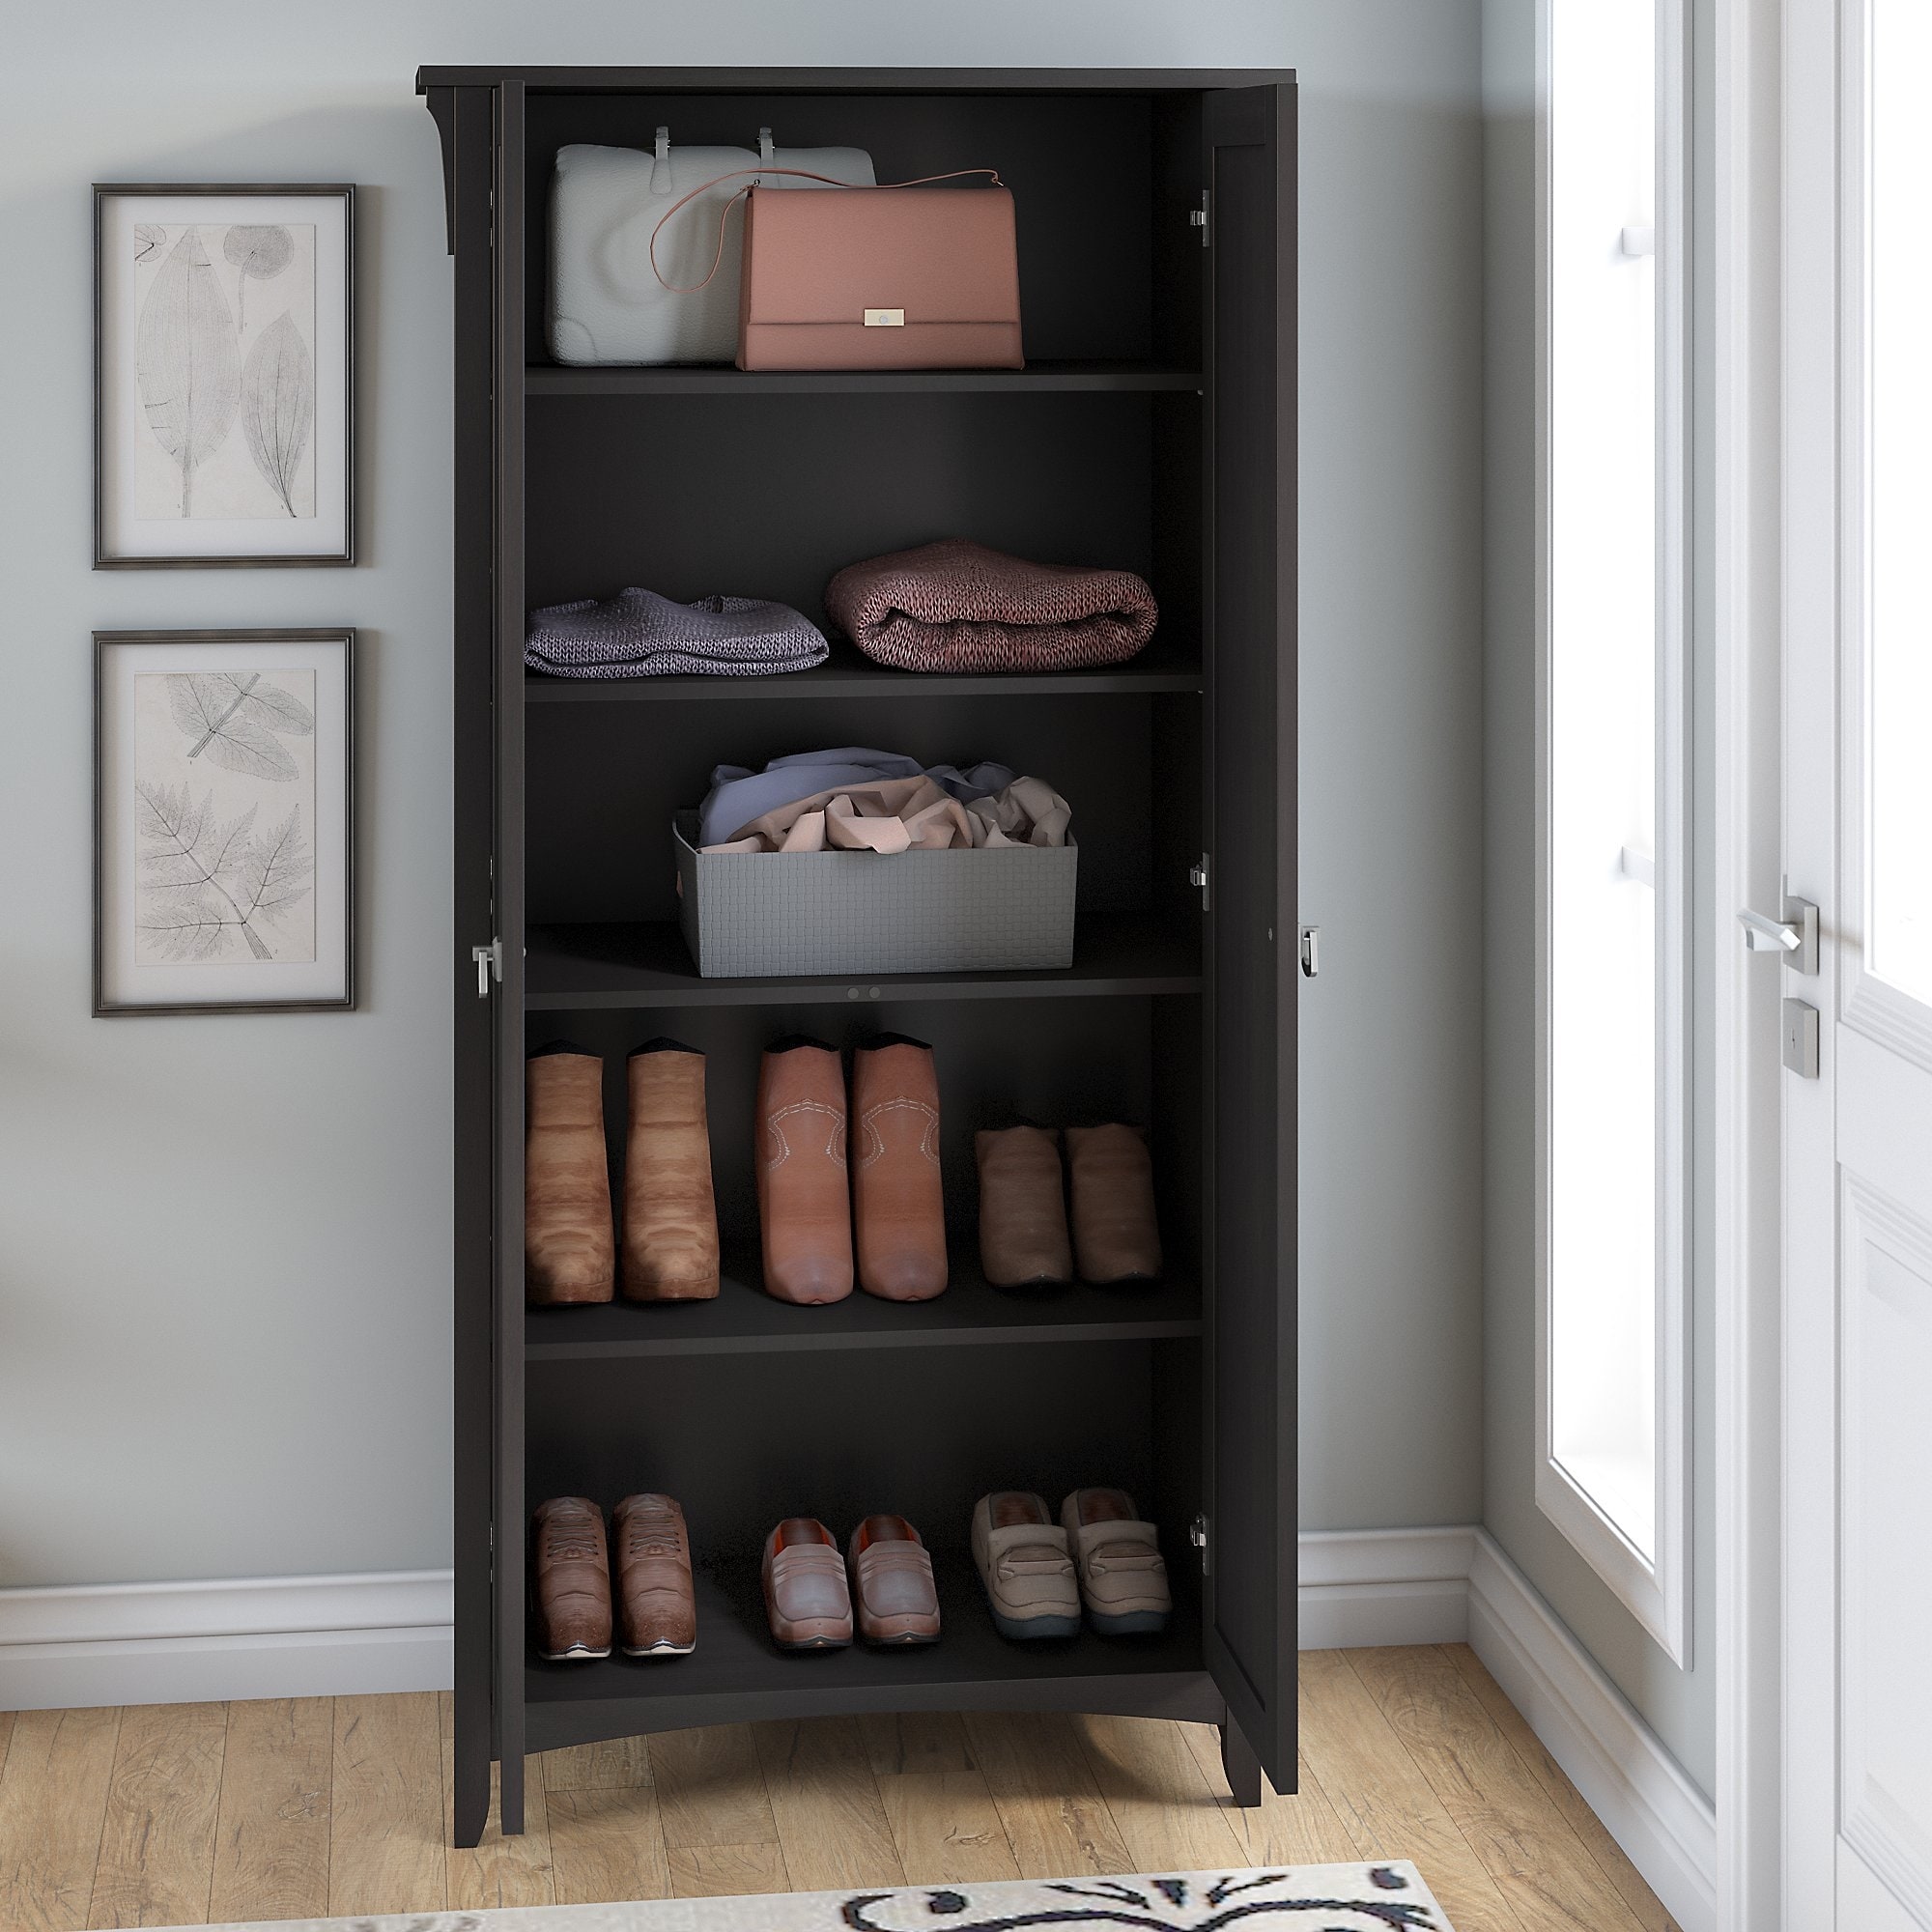 https://ak1.ostkcdn.com/images/products/is/images/direct/d52af2573e5b5c83e4d6c4beb241e940e727bfd3/Salinas-Entryway-Storage-Set-with-Hall-Tree%2C-Shoe-Bench-and-Cabinets.jpg